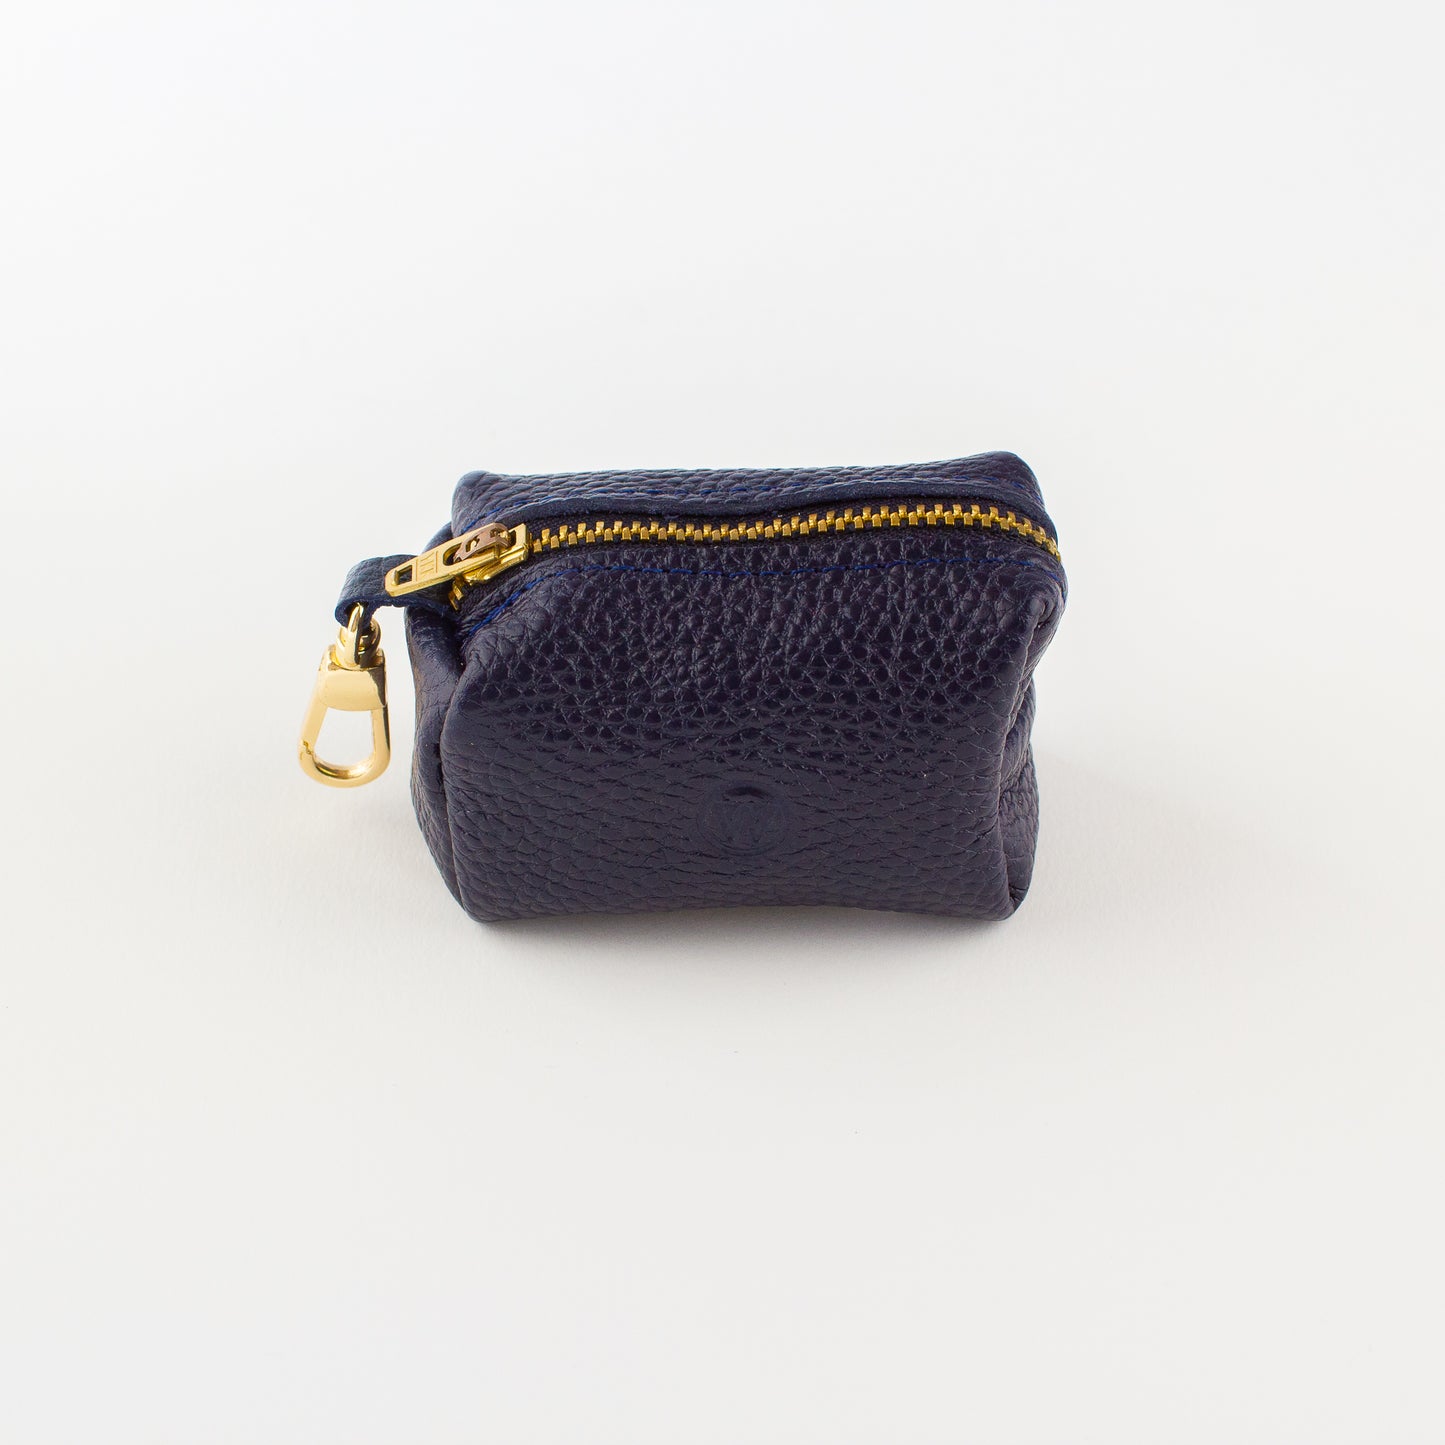 Navy leather poo bag Willow Walks